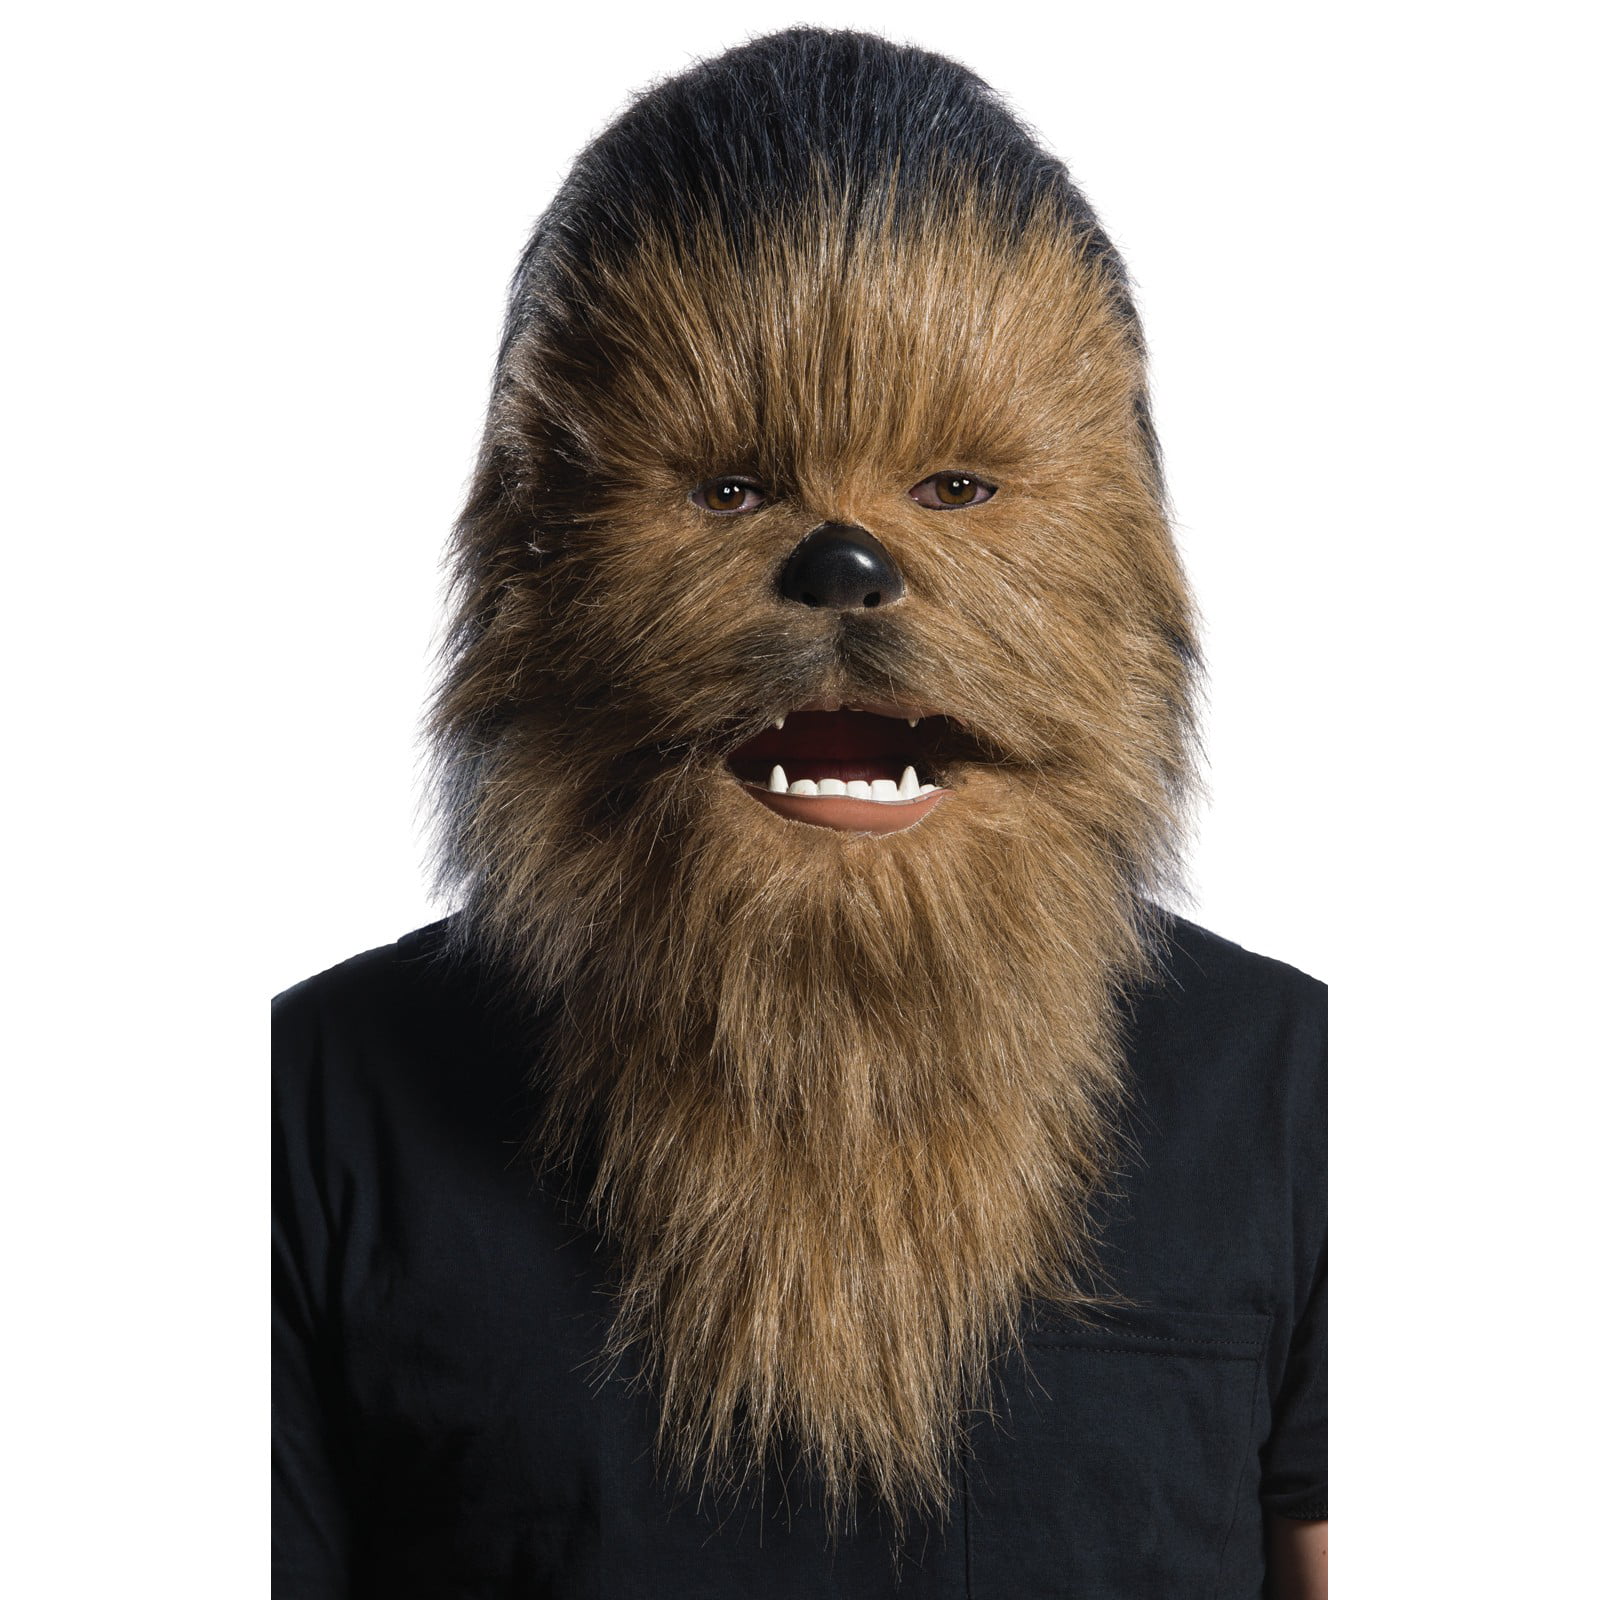 Star Wars Party Masks Realistic Face Masks Fancy Dress Fun Children or Adults 